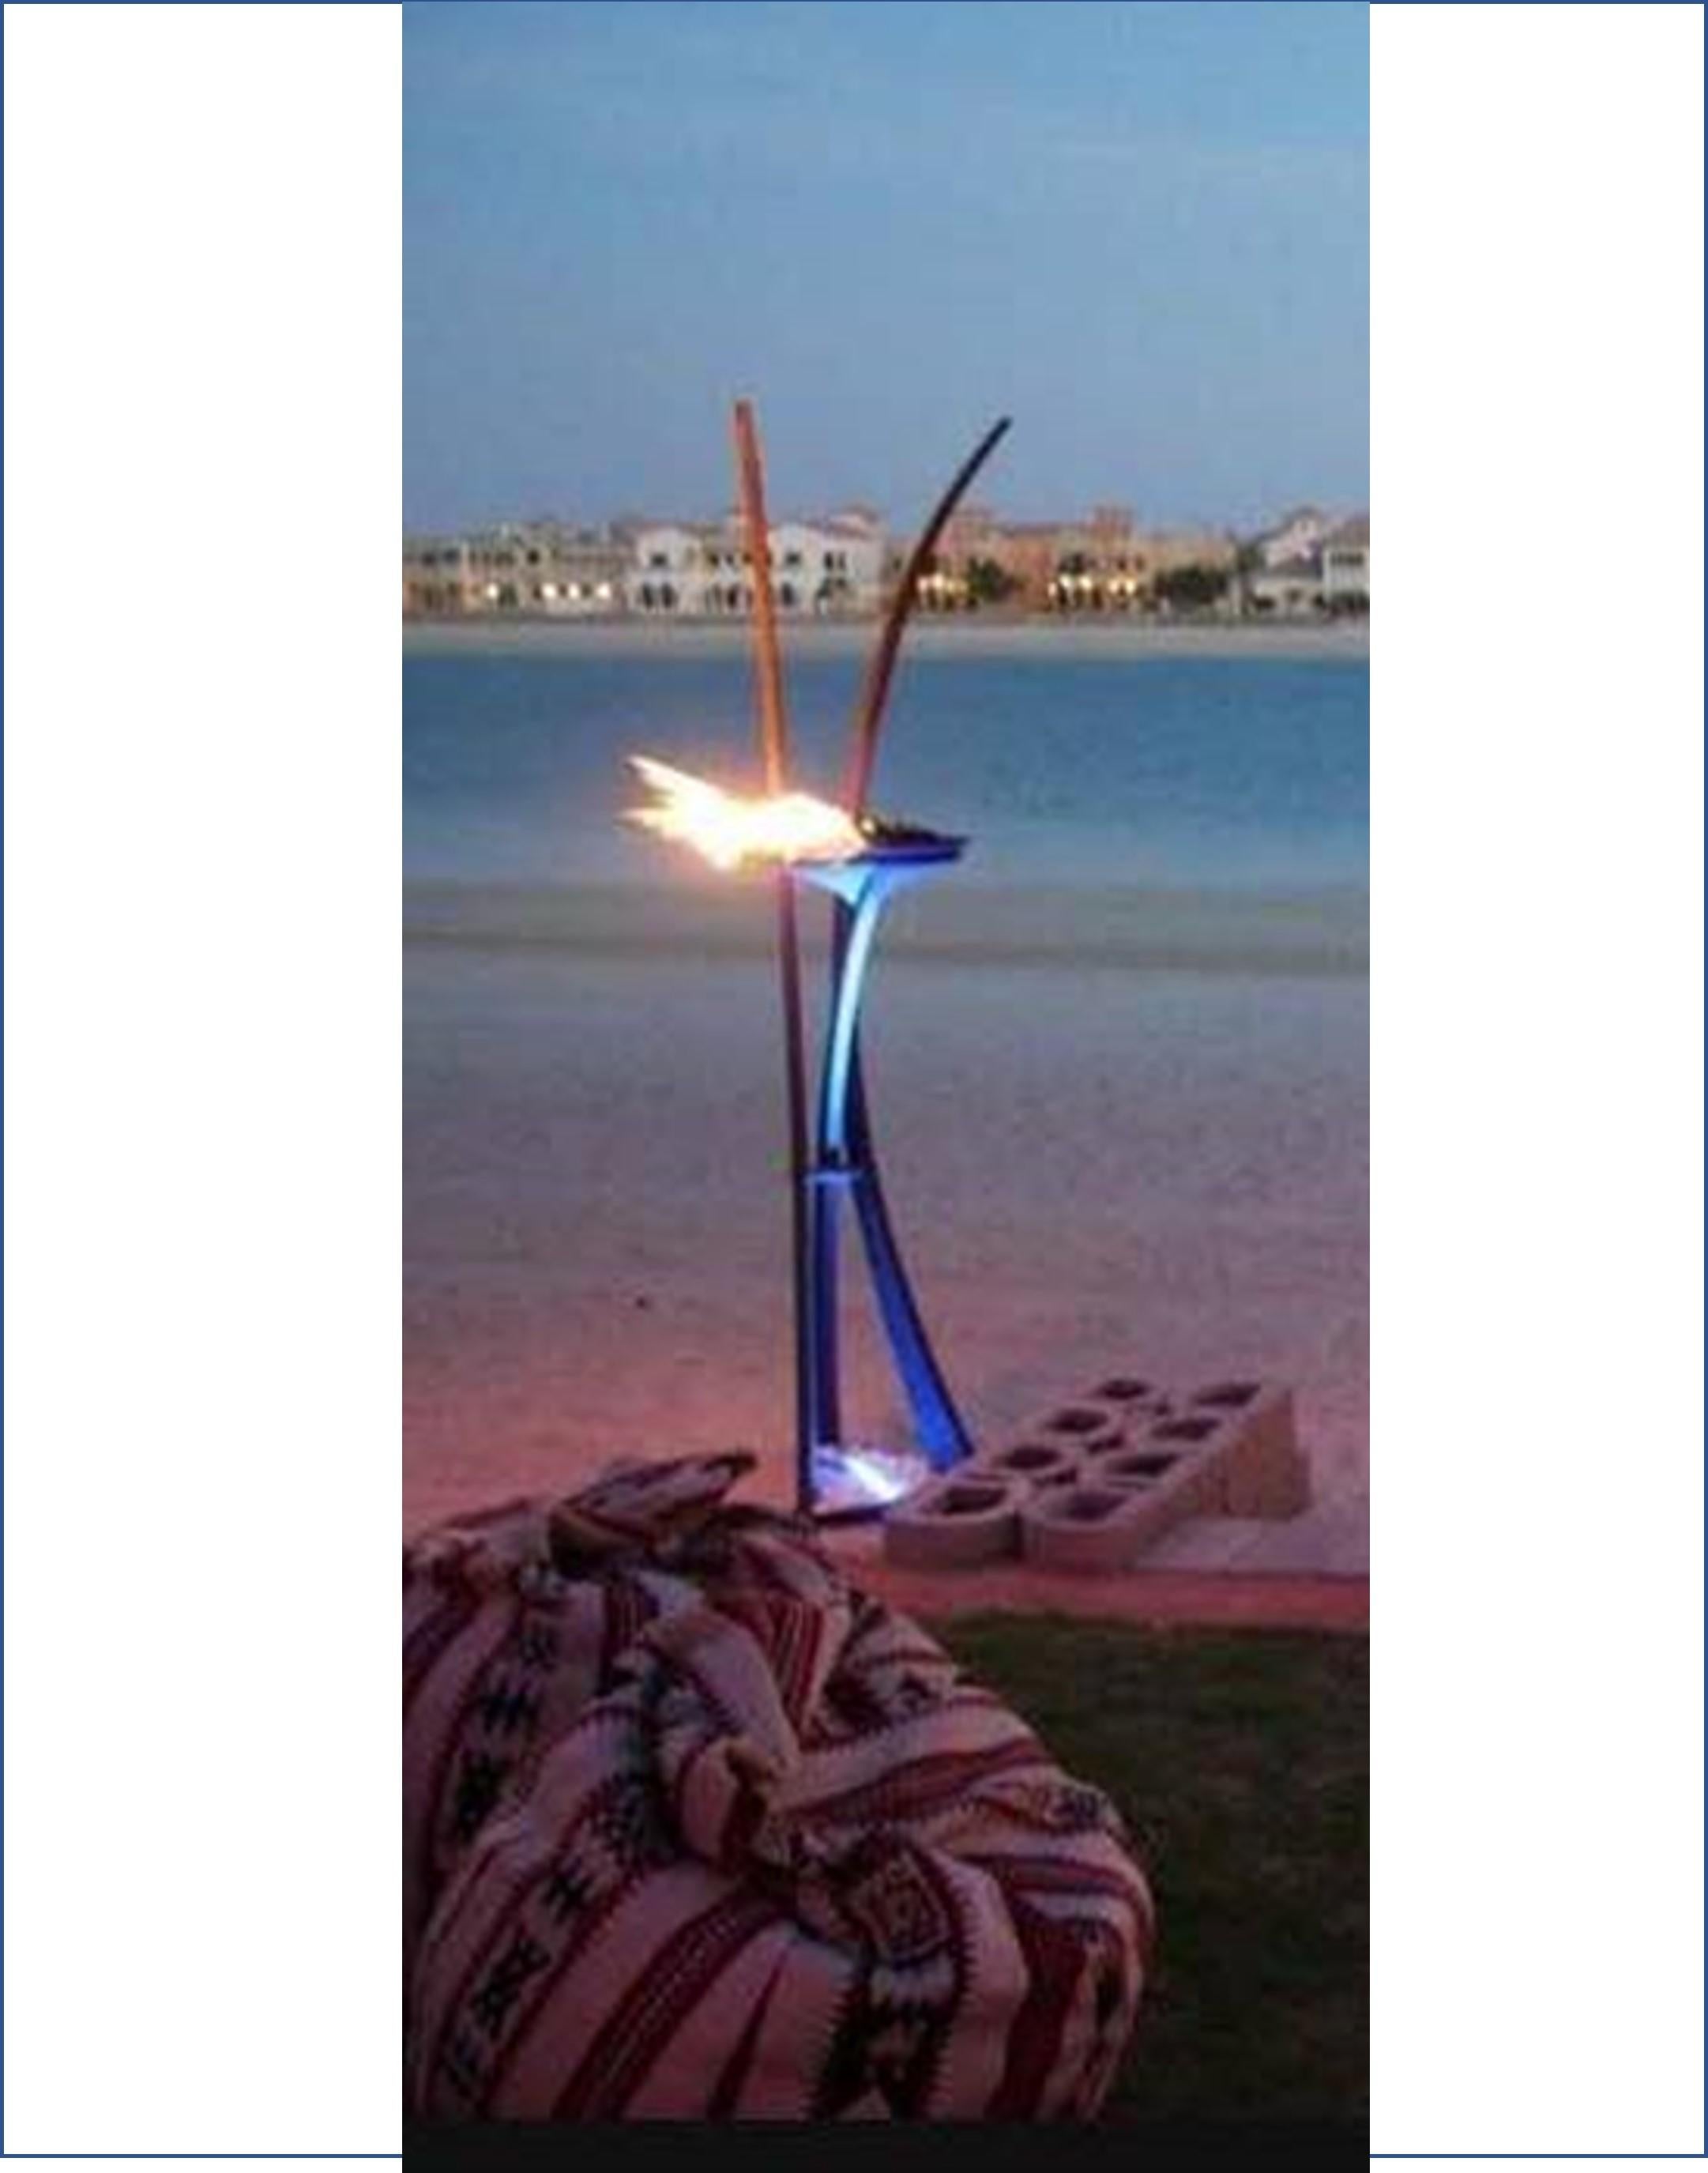 Designed by Beau McClellan; sculptor, blacksmith, lighting designer, renaissance man. The Oryx is both sculpture and functional fixture, appearing both delicate and solid, it can be fitted for natural gas or propane. A color-changing lamp is